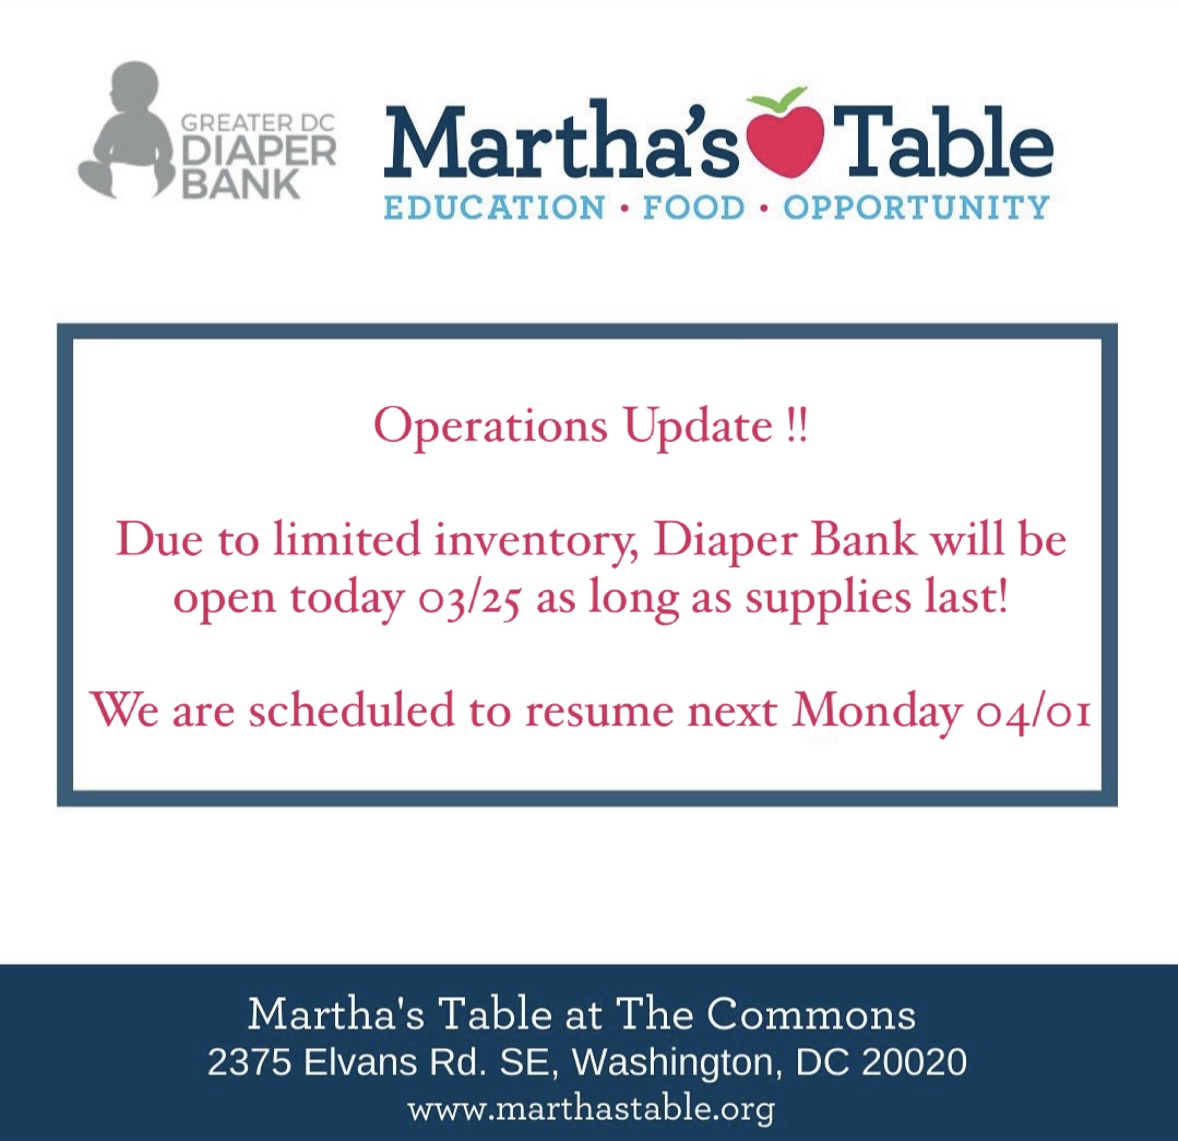 Operations Update! ❣️ Due to limited inventory, the Diaper Bank will be open as long as supplies last. We are scheduled to resume next Monday 04/01. #update #resources